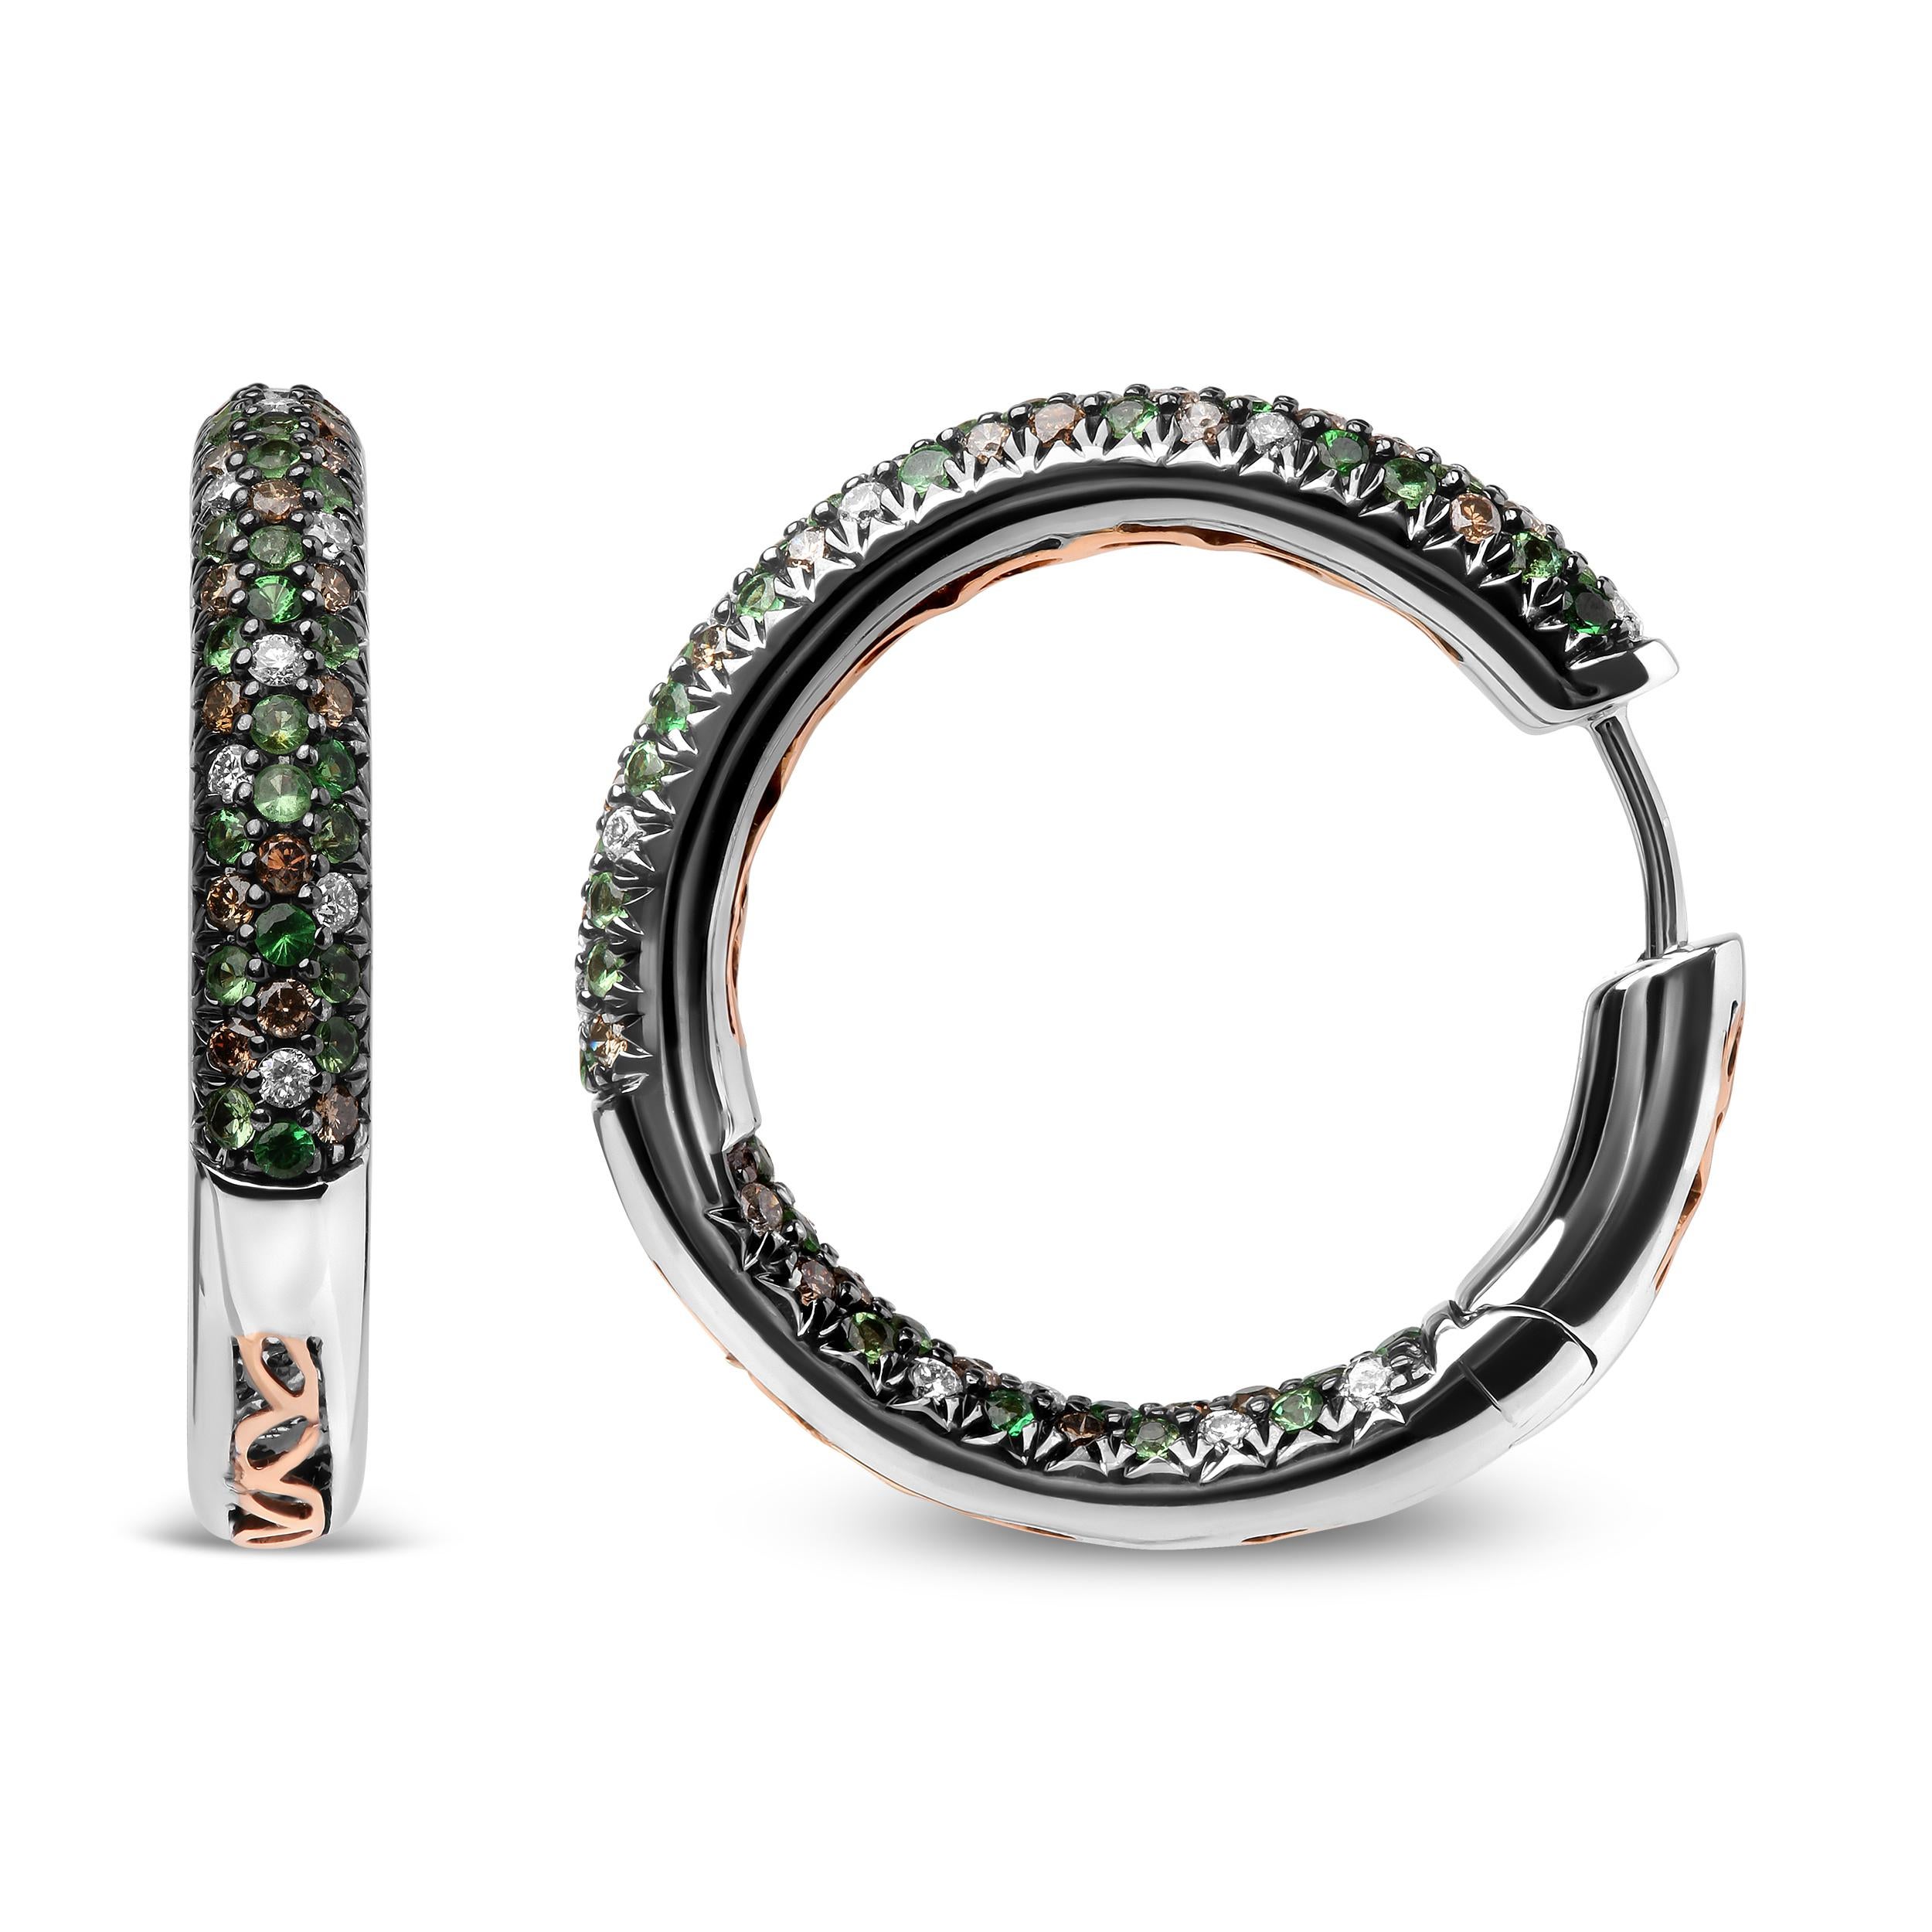 The glamorous inside-outside design of these 18k white gold hoops makes the natural gemstones and diamonds sparkle at every angle. This upscale pair sizzles in a design of 1.3mm round heat-treated green tsavorite gemstone blended with brown and